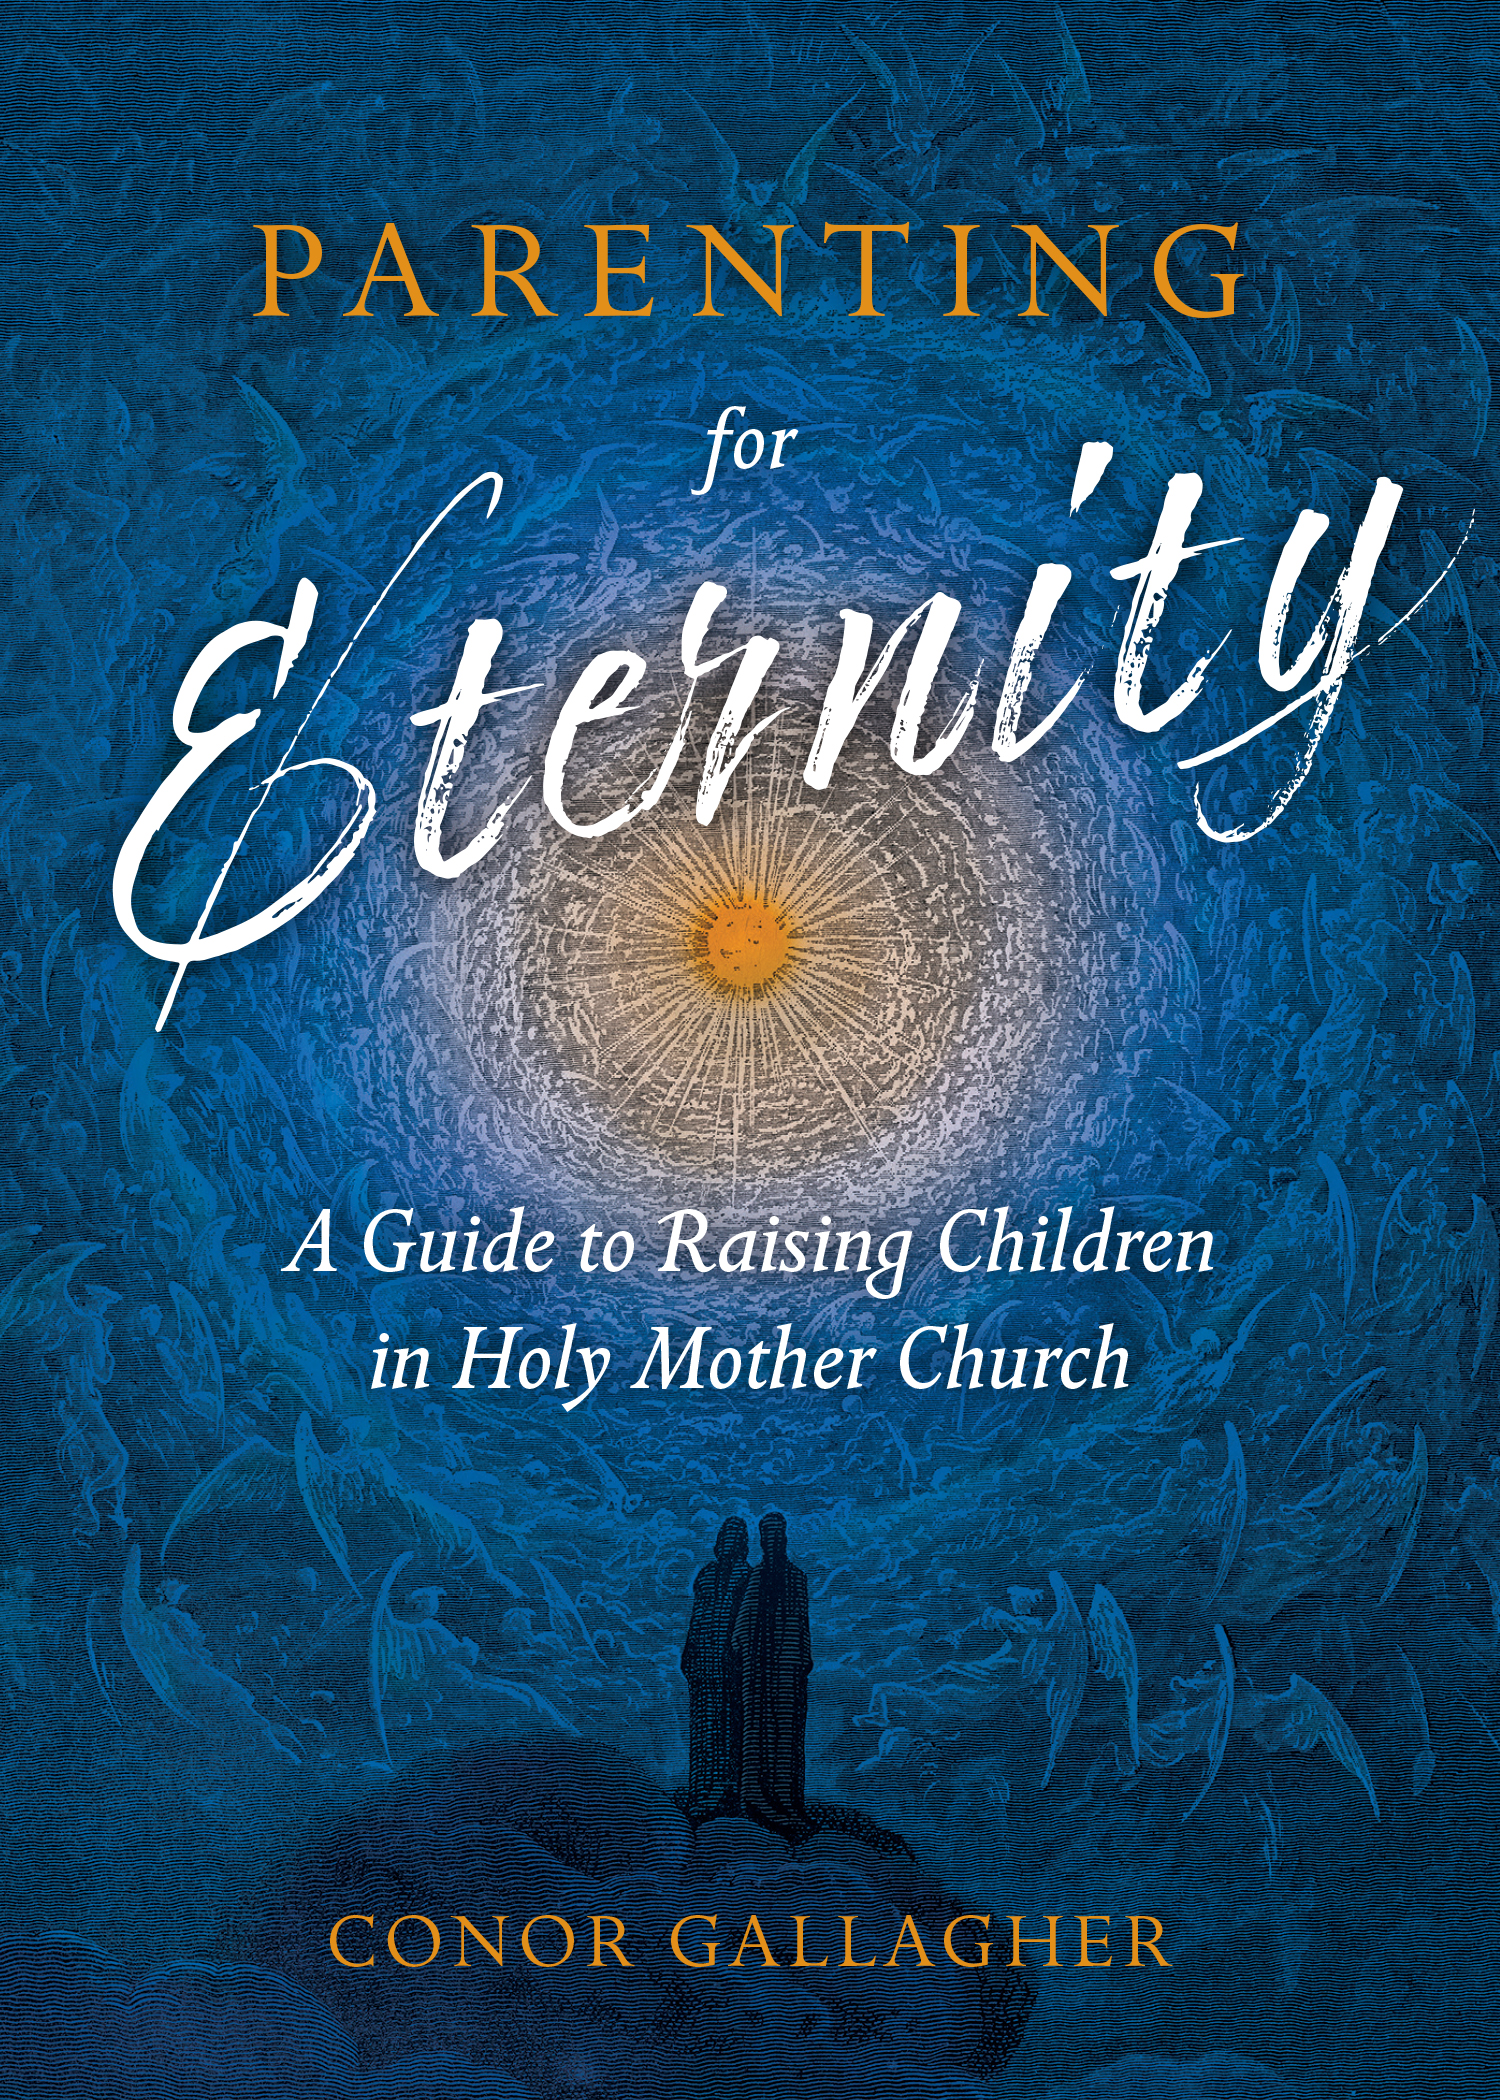 Parenting for Eternity / Conor Gallagher